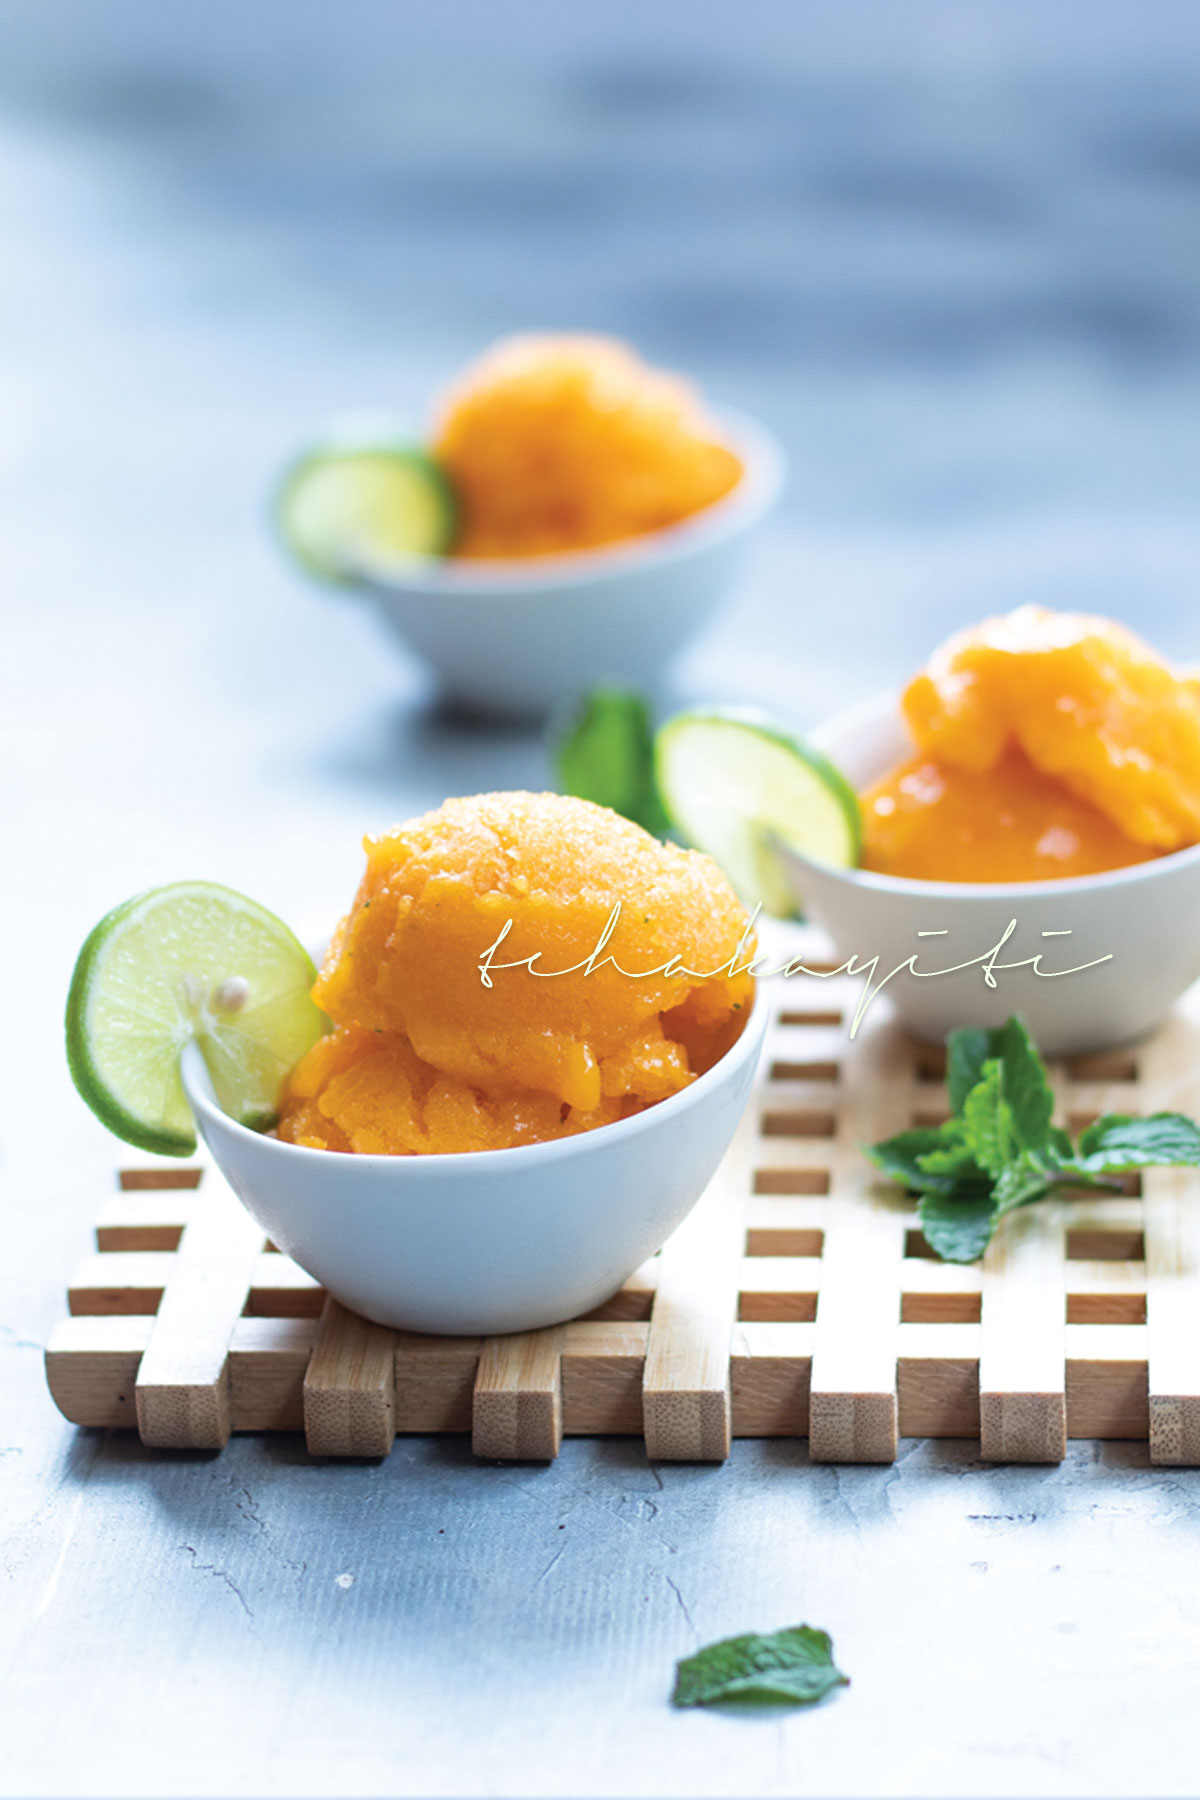 This mango sorbet is easy and simple to make. The perfect treat to cool down on a hot summer day. | tchakayiti.com